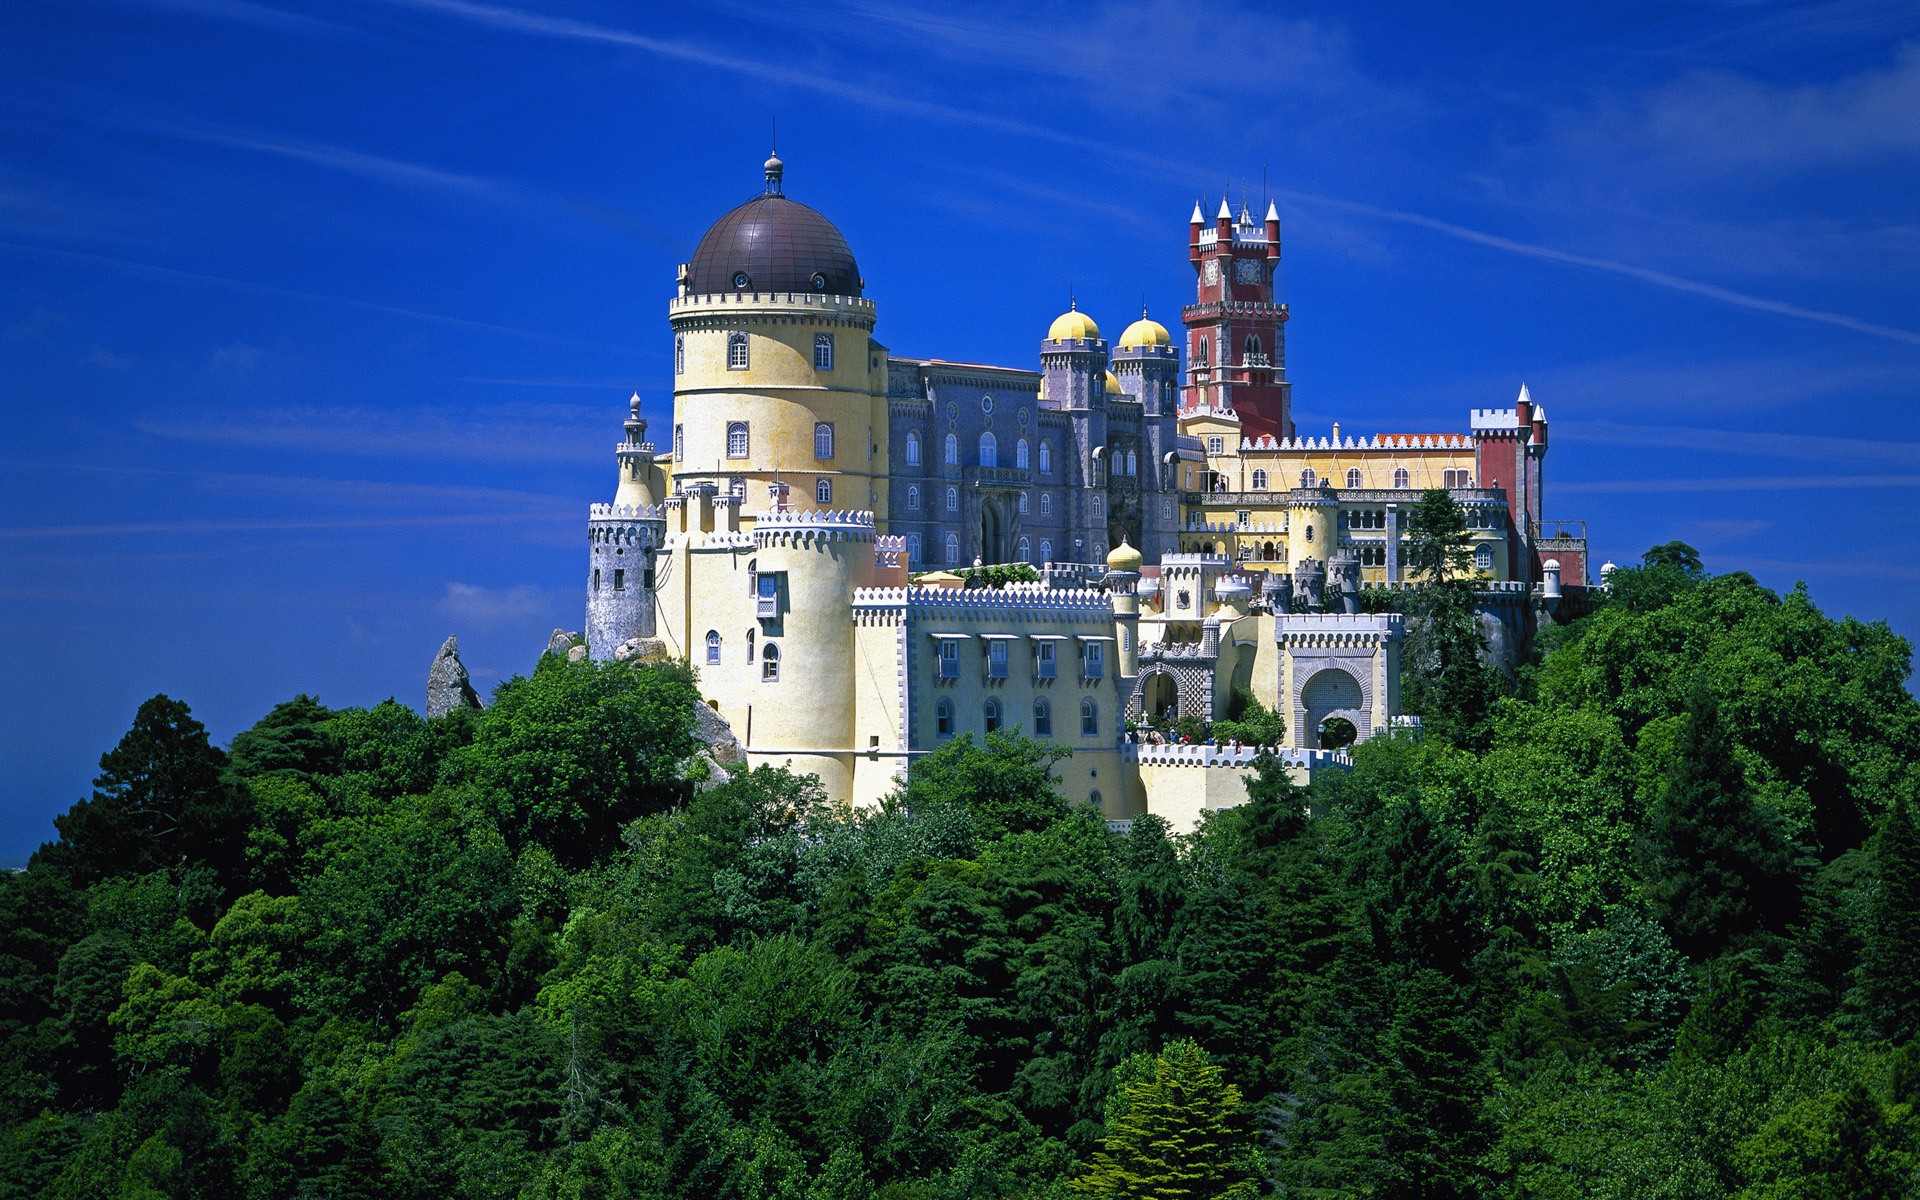 Windows 7 Wallpapers: Castles of Europe #13 - 1920x1200